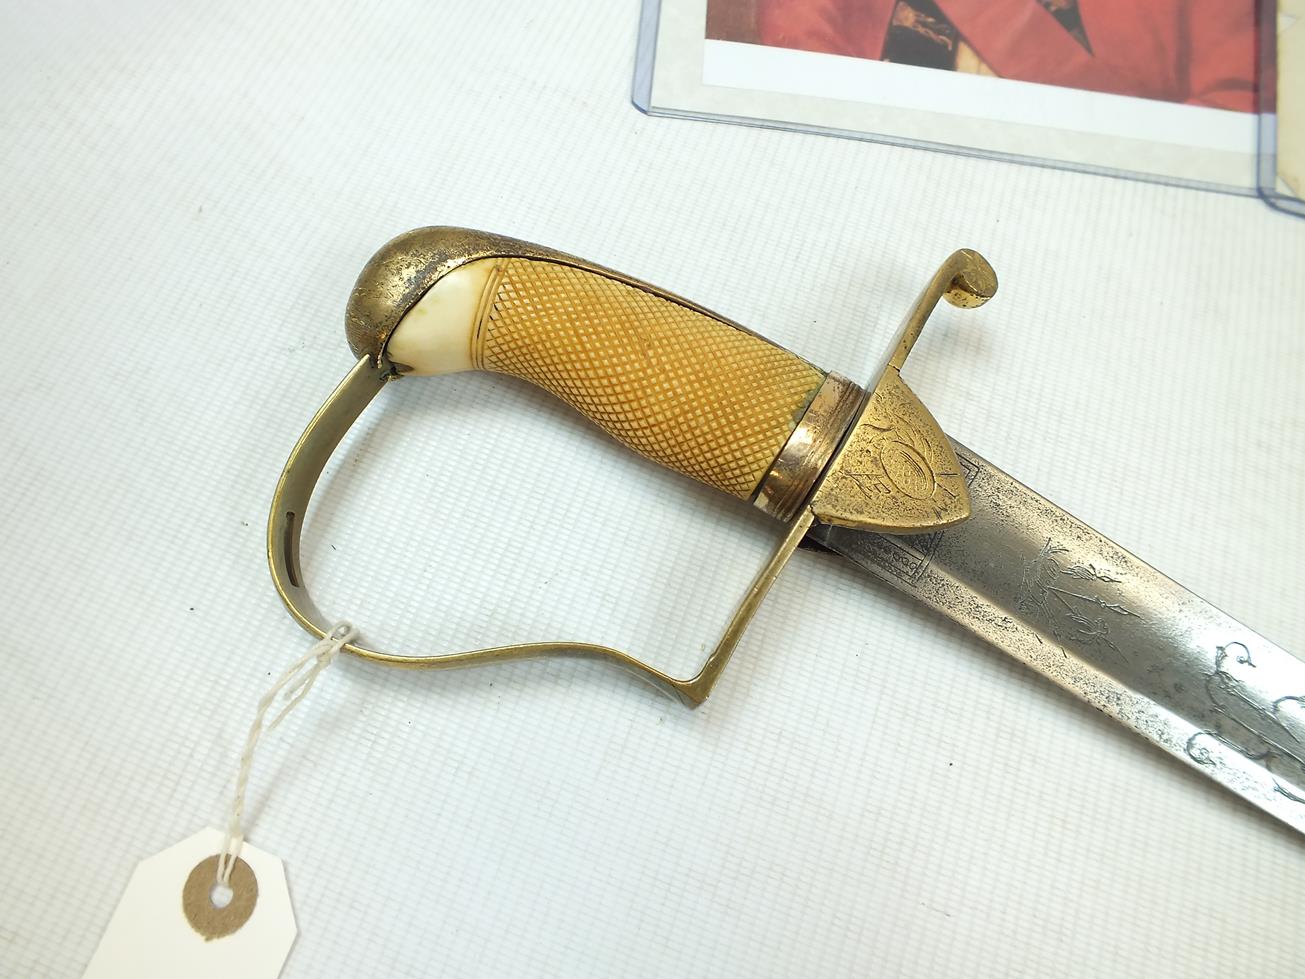 A 1796 PATTERN LIGHT CAVALRY OFFICER'S SWORD TO CAPTAIN JOHN PERRY OF THE JAMAICAN REGIMENT OF - Image 4 of 18